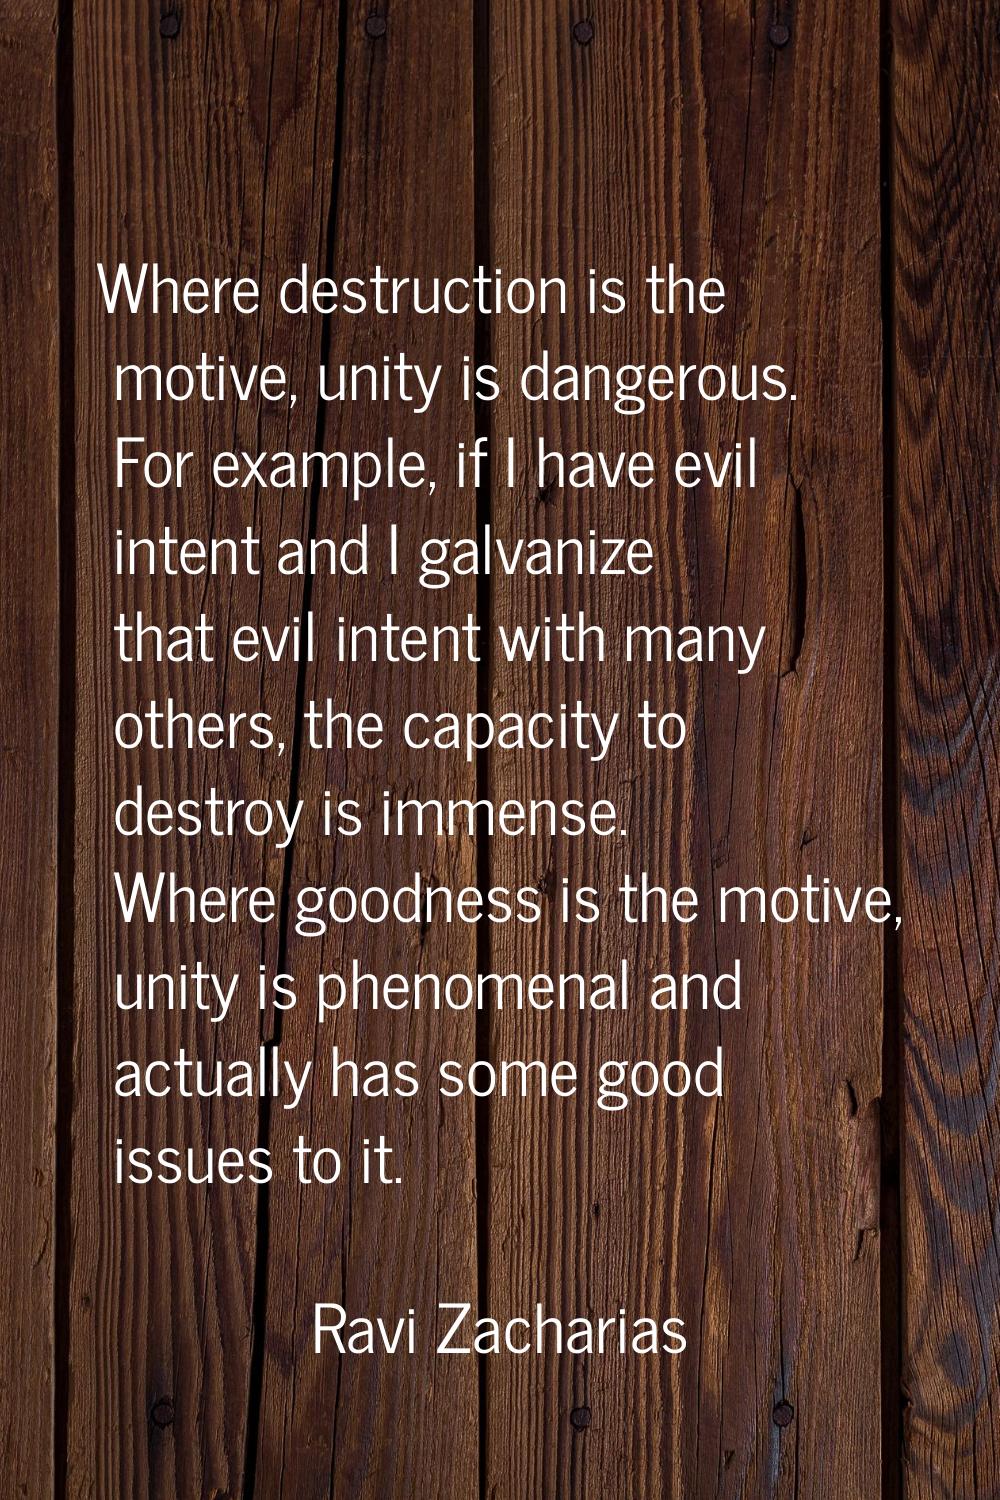 Where destruction is the motive, unity is dangerous. For example, if I have evil intent and I galva